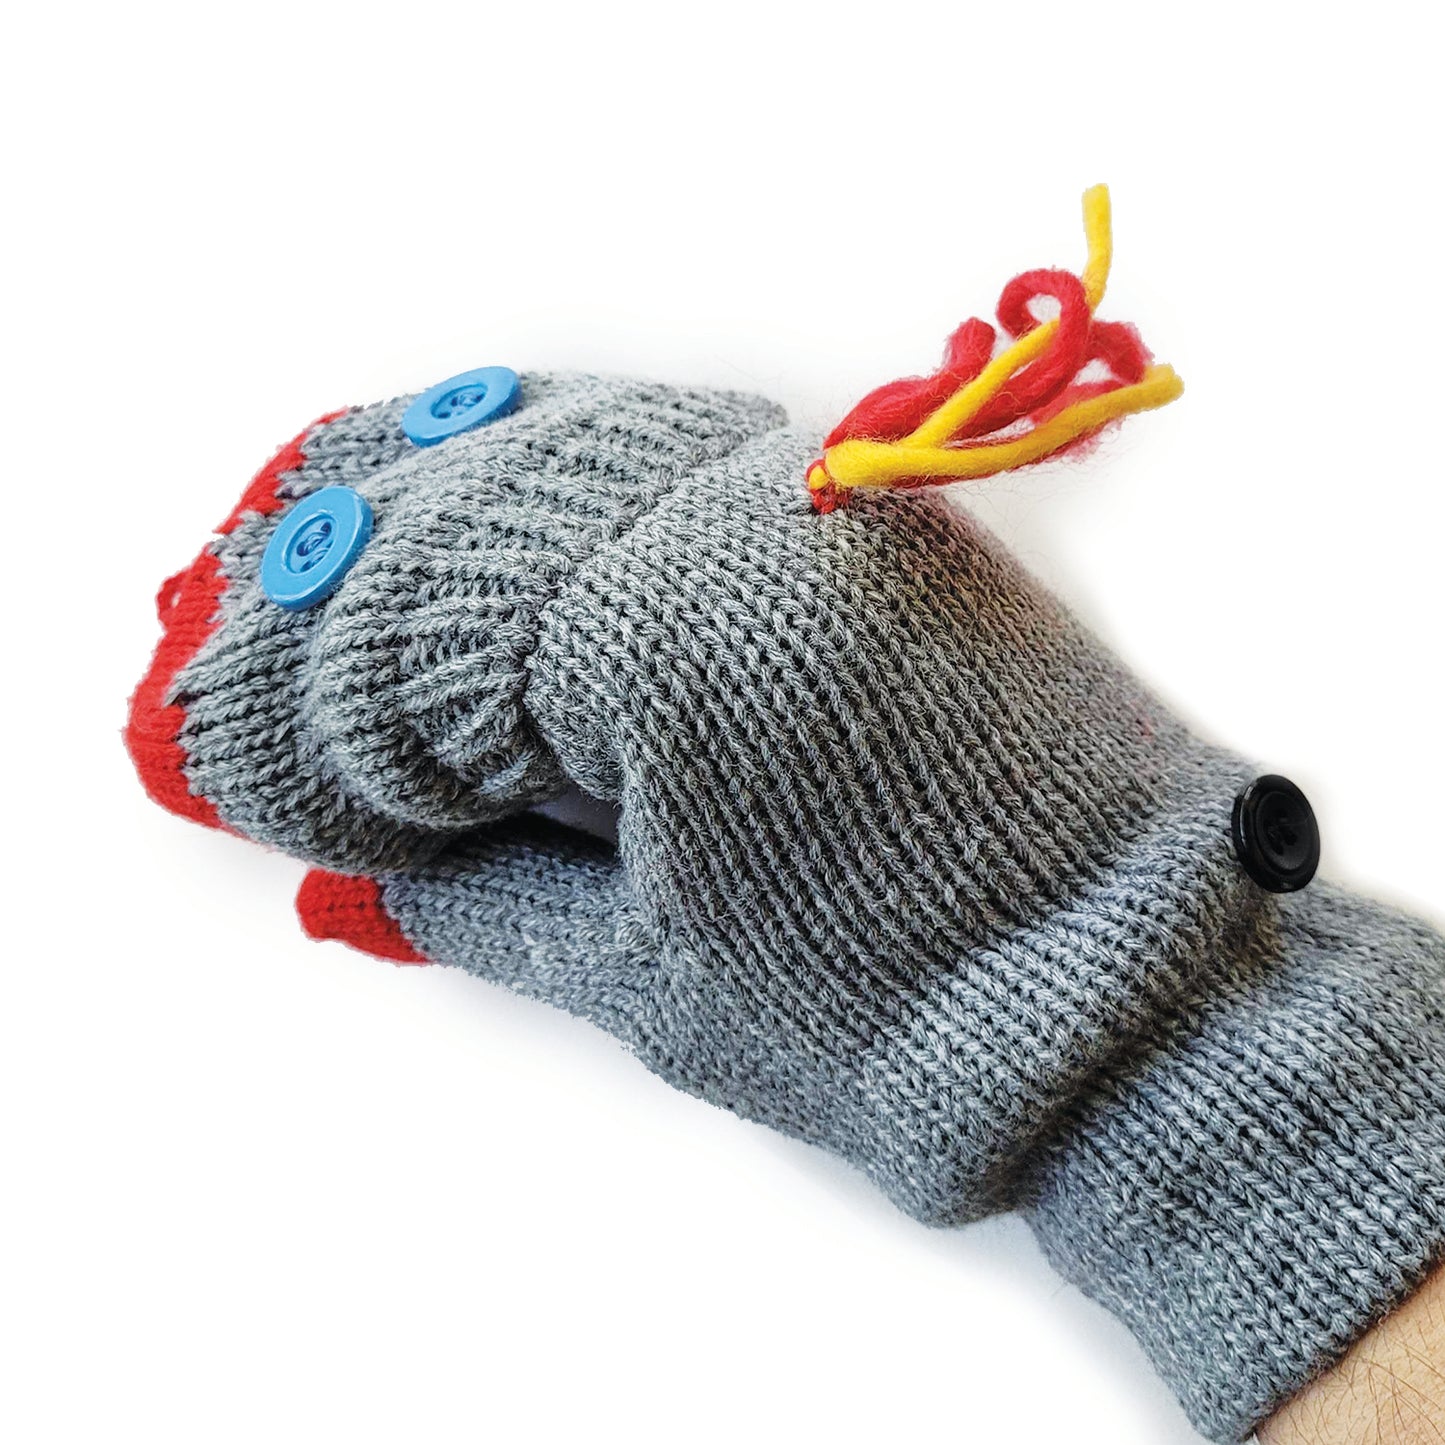 Rear view: A set of knit grey flip-top mittens, each with two blue button 'eyes' sewn onto the flip top. Red yarn forms a sock puppet 'mouth' at the top and there is red-and-yellow yarn 'hair' sewn below the knuckles. 